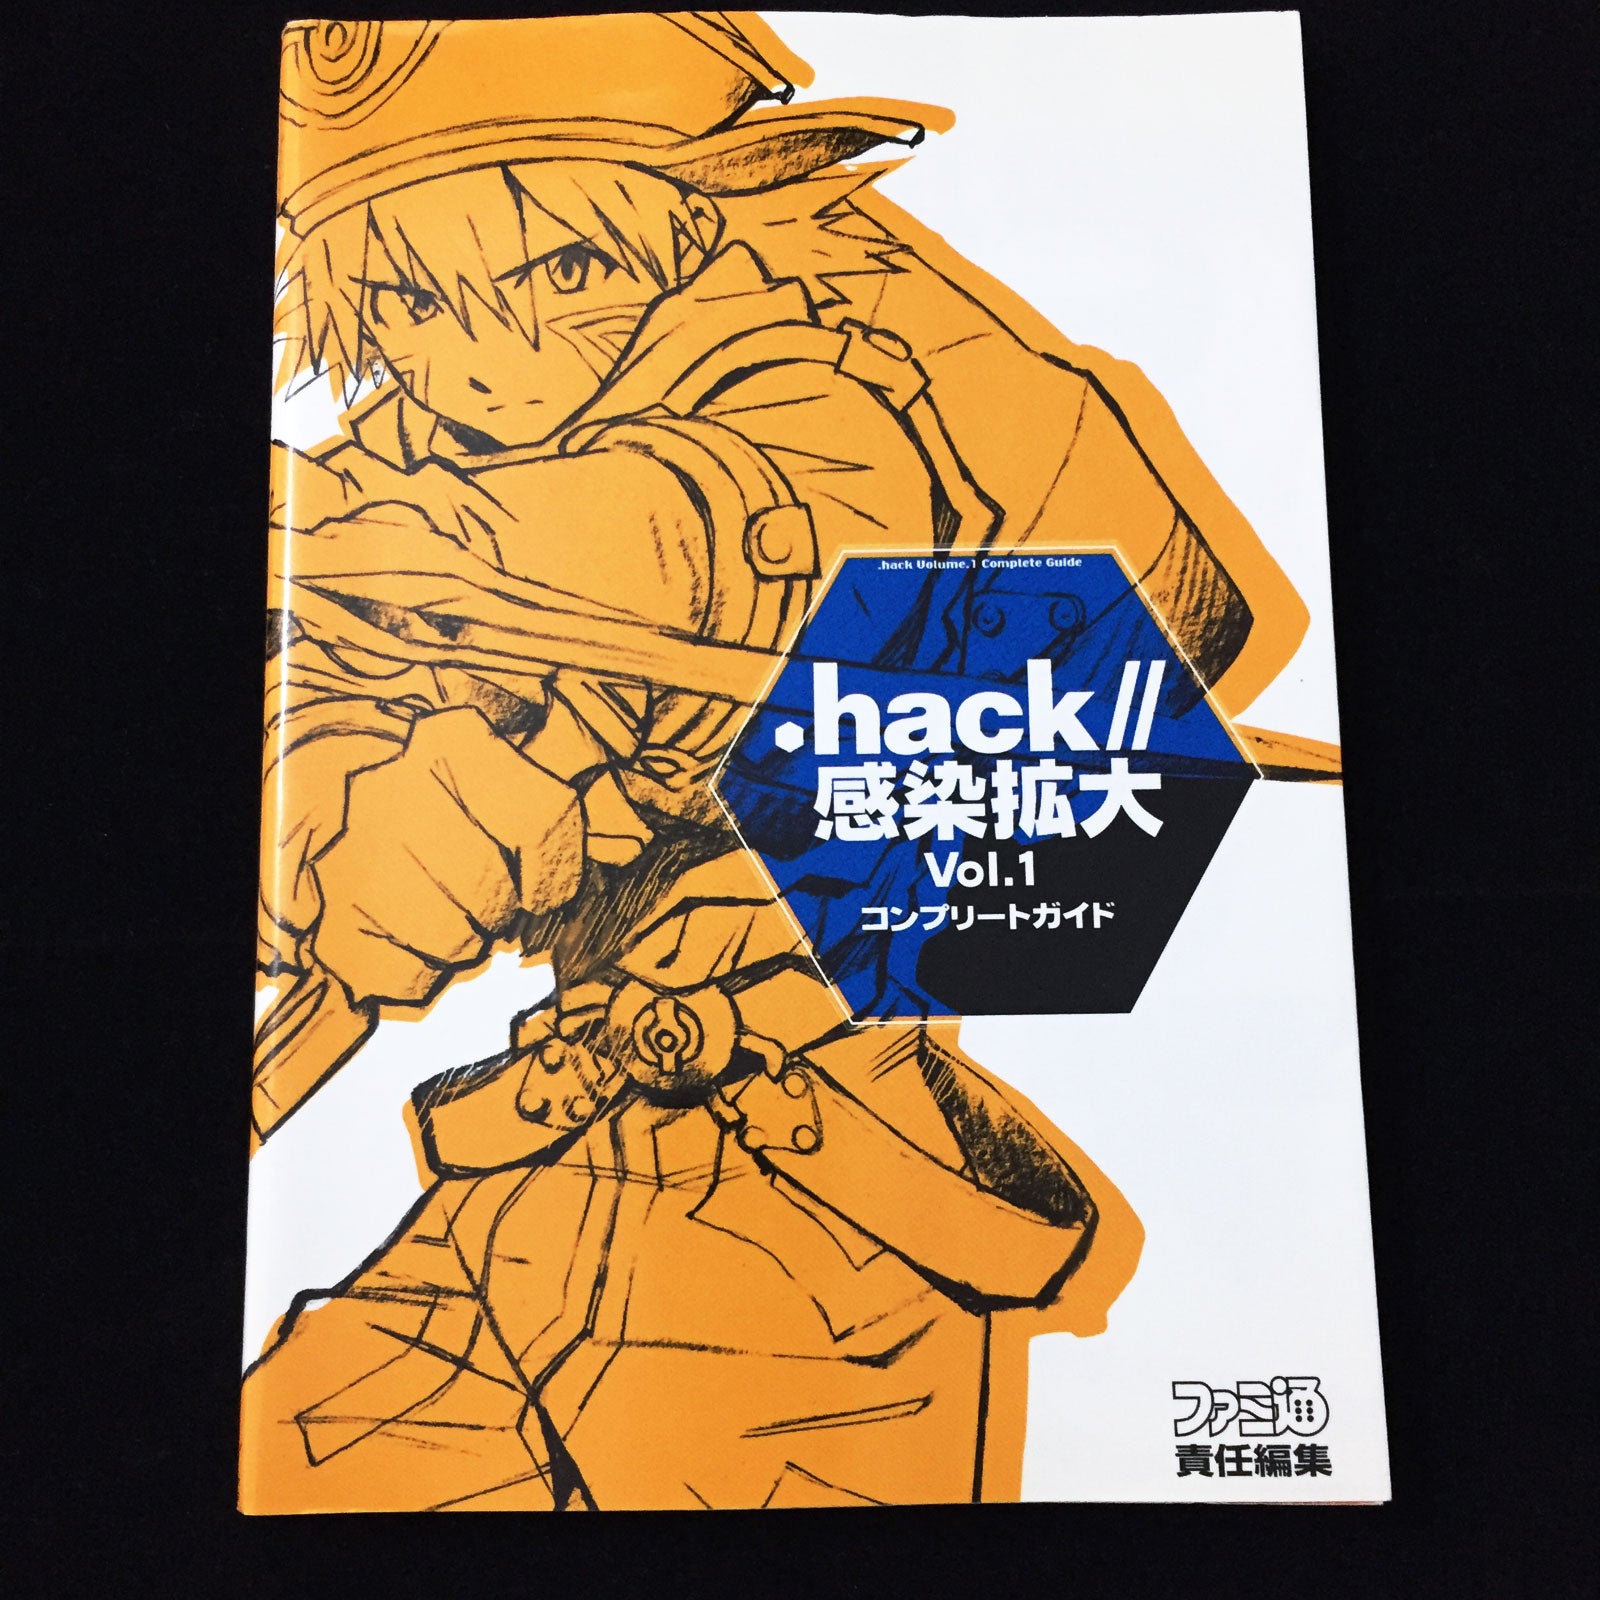 .hack//INFECTION Vol.1 Complete Guide